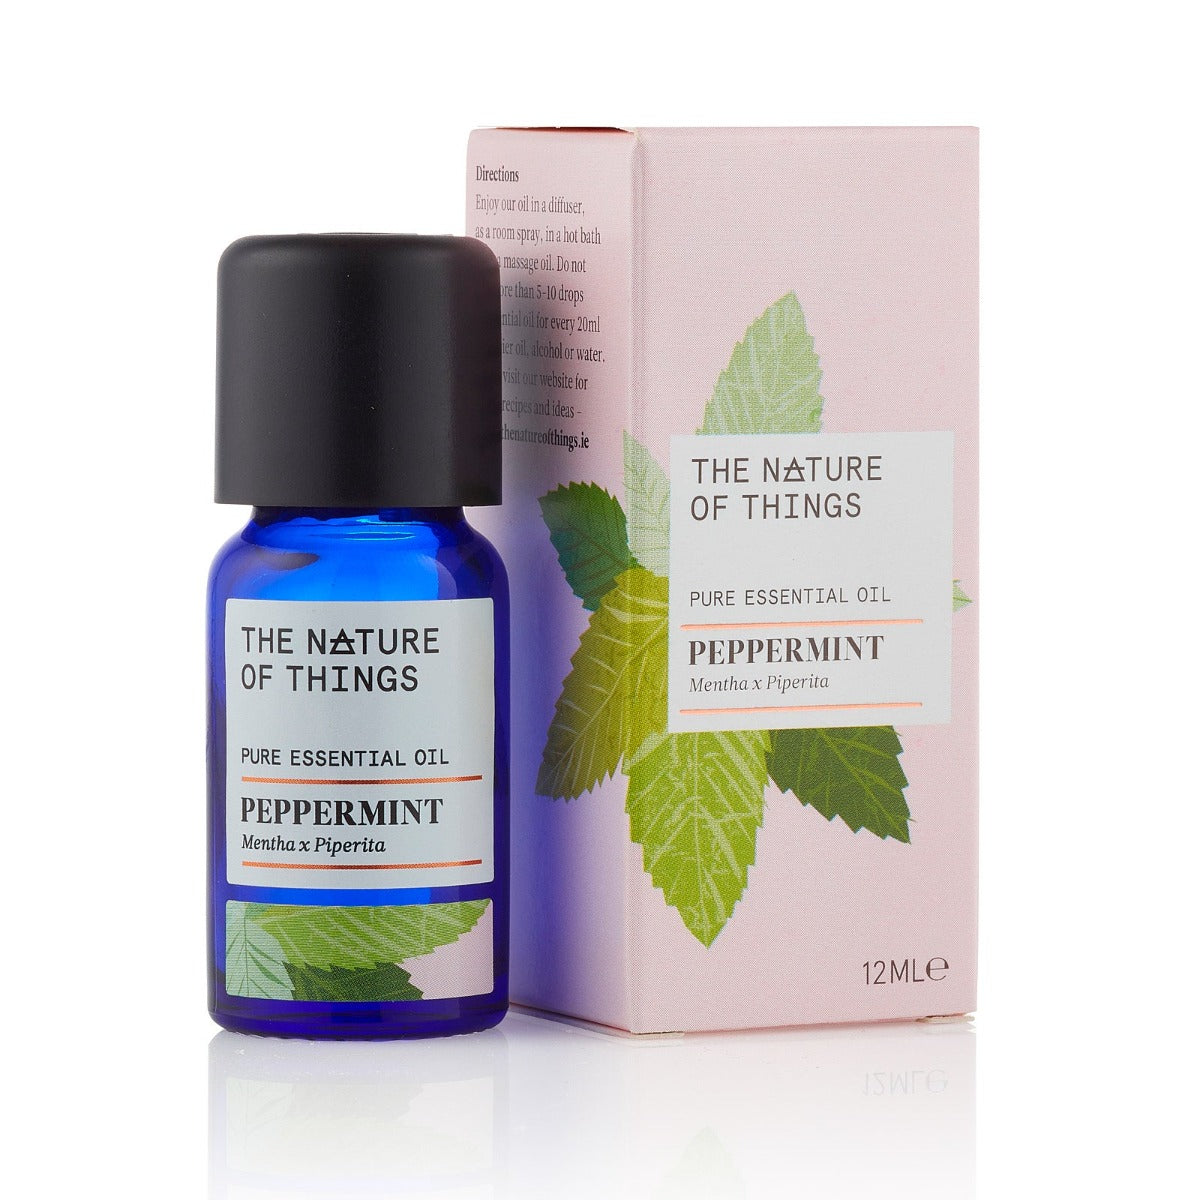 Organic Peppermint Essential Oil from The Nature of Things